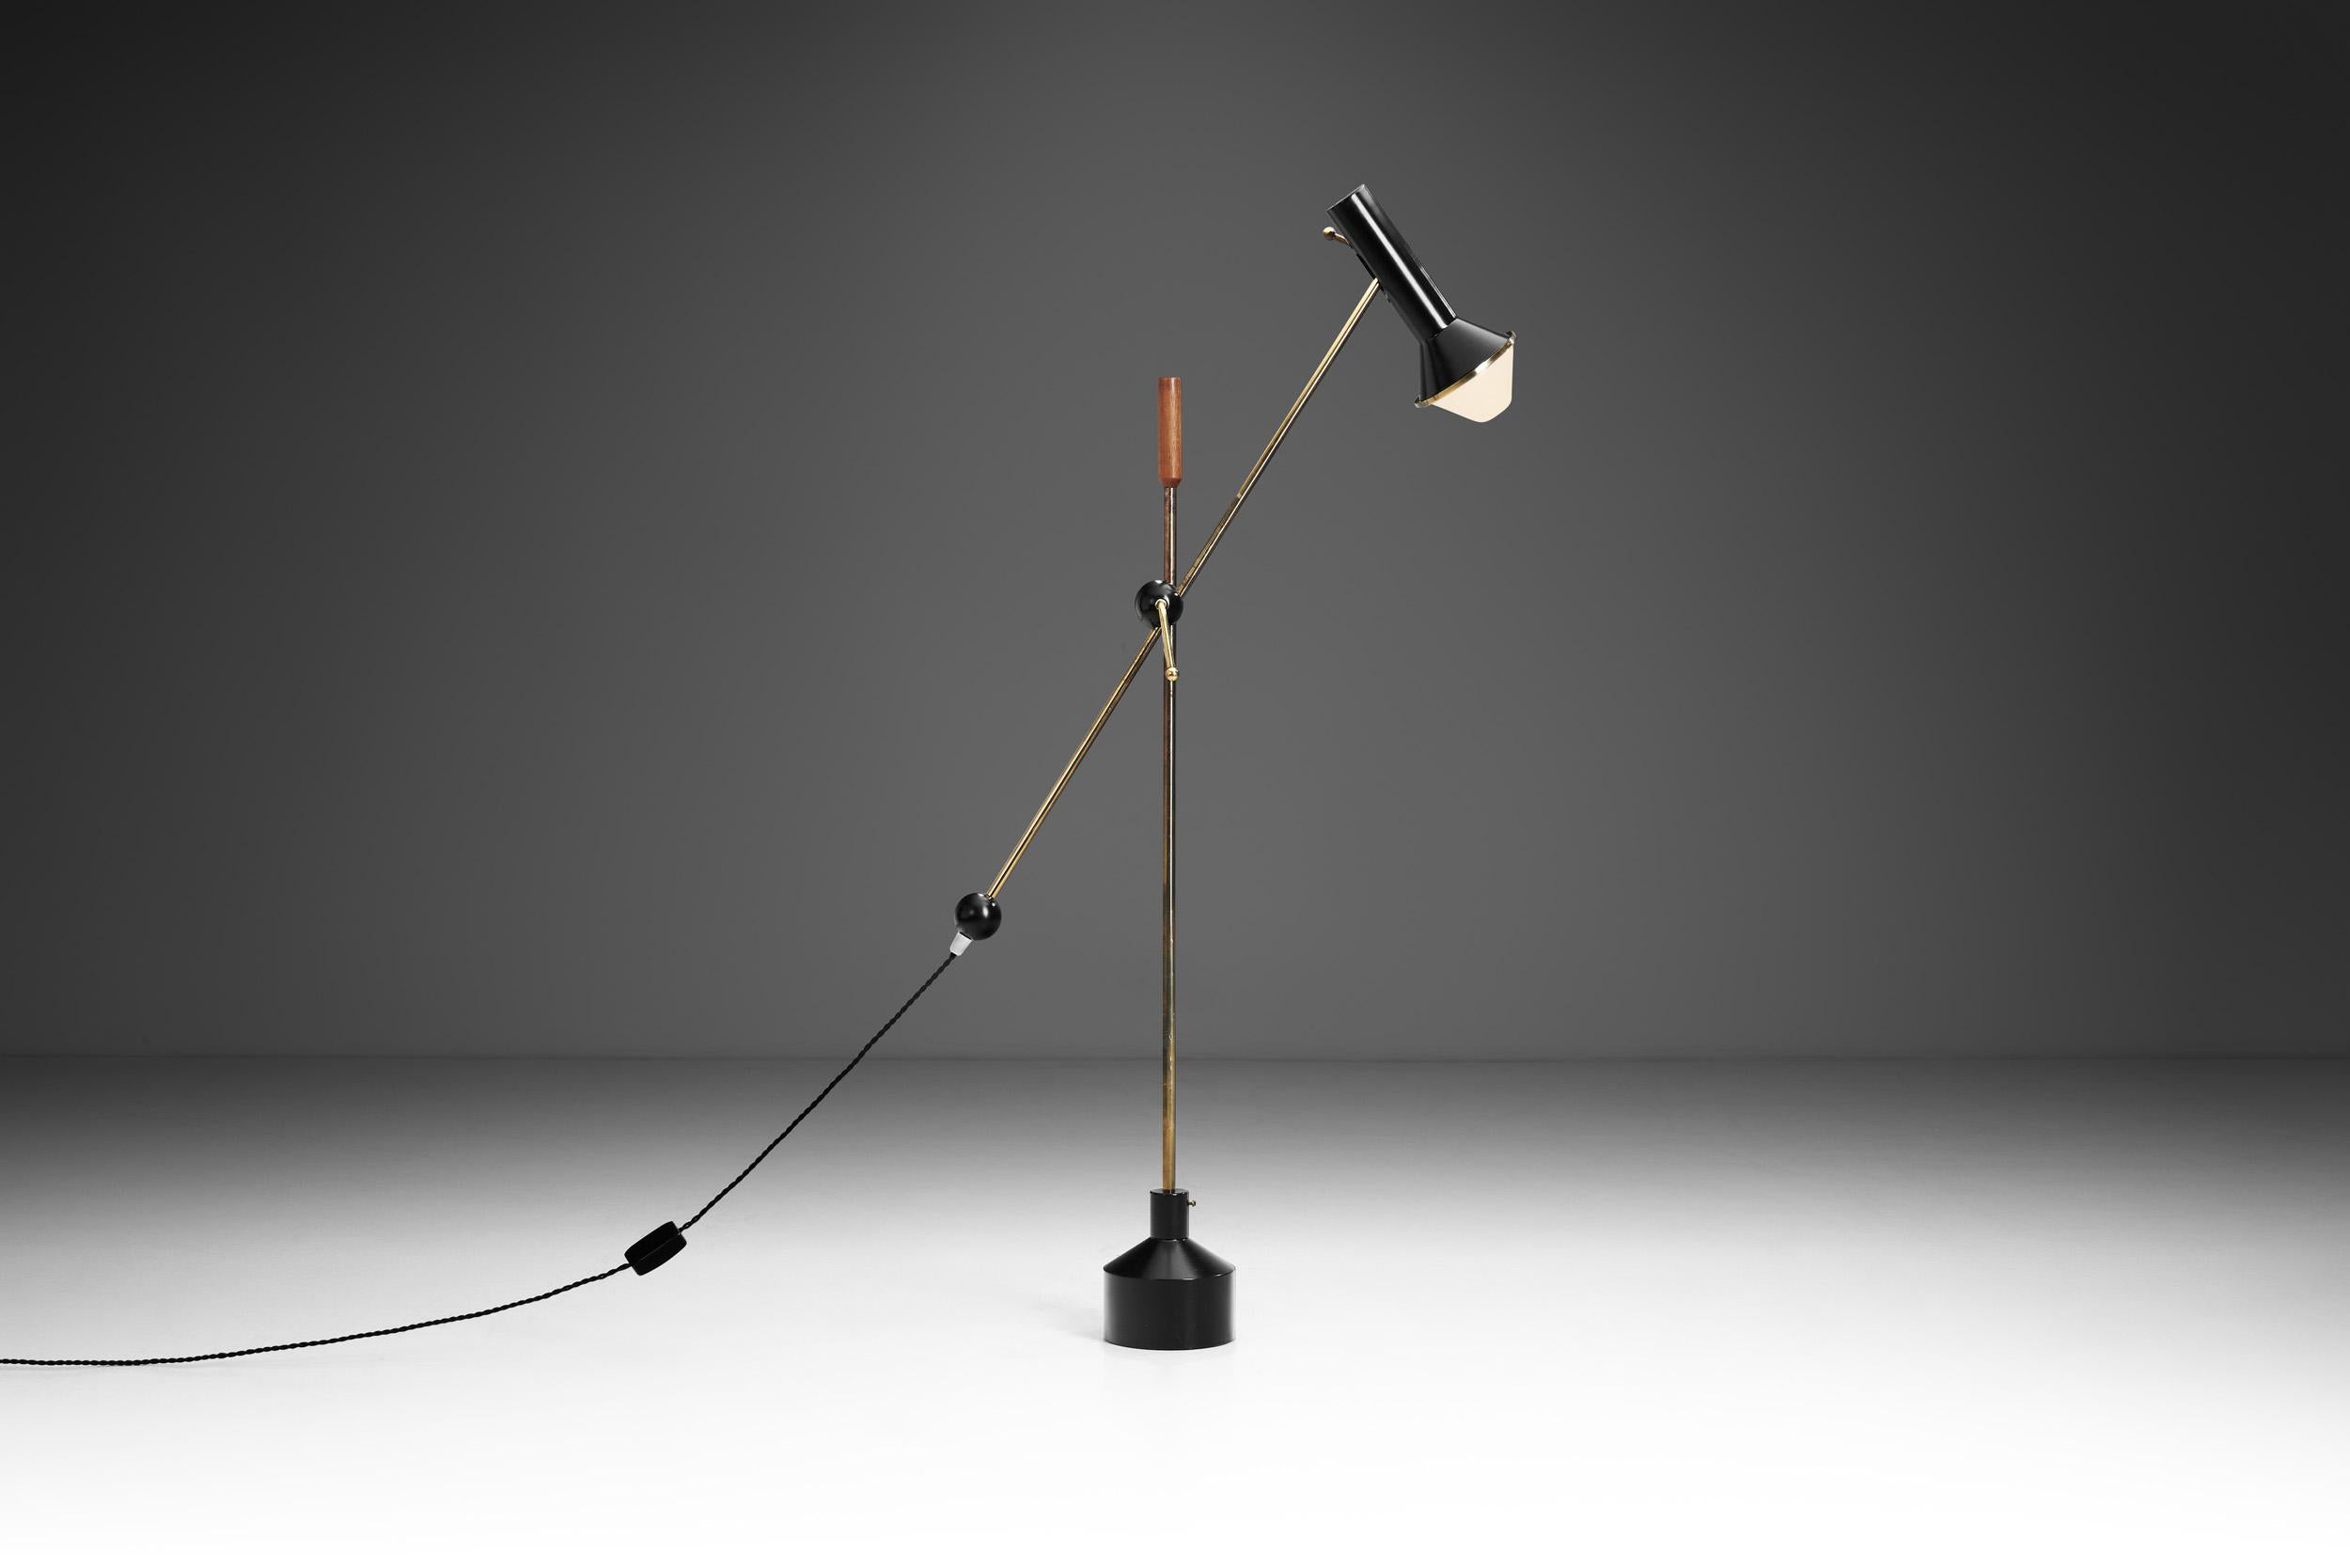 Tapio Wirkkala (1915-1985) was a multitalented design genius, widely considered a leading figure of modern Finnish industrial art. This lamp model is one of the cornerstones of Tapio Wirkkala´s repertoire; this groundbreaking piece is one of the